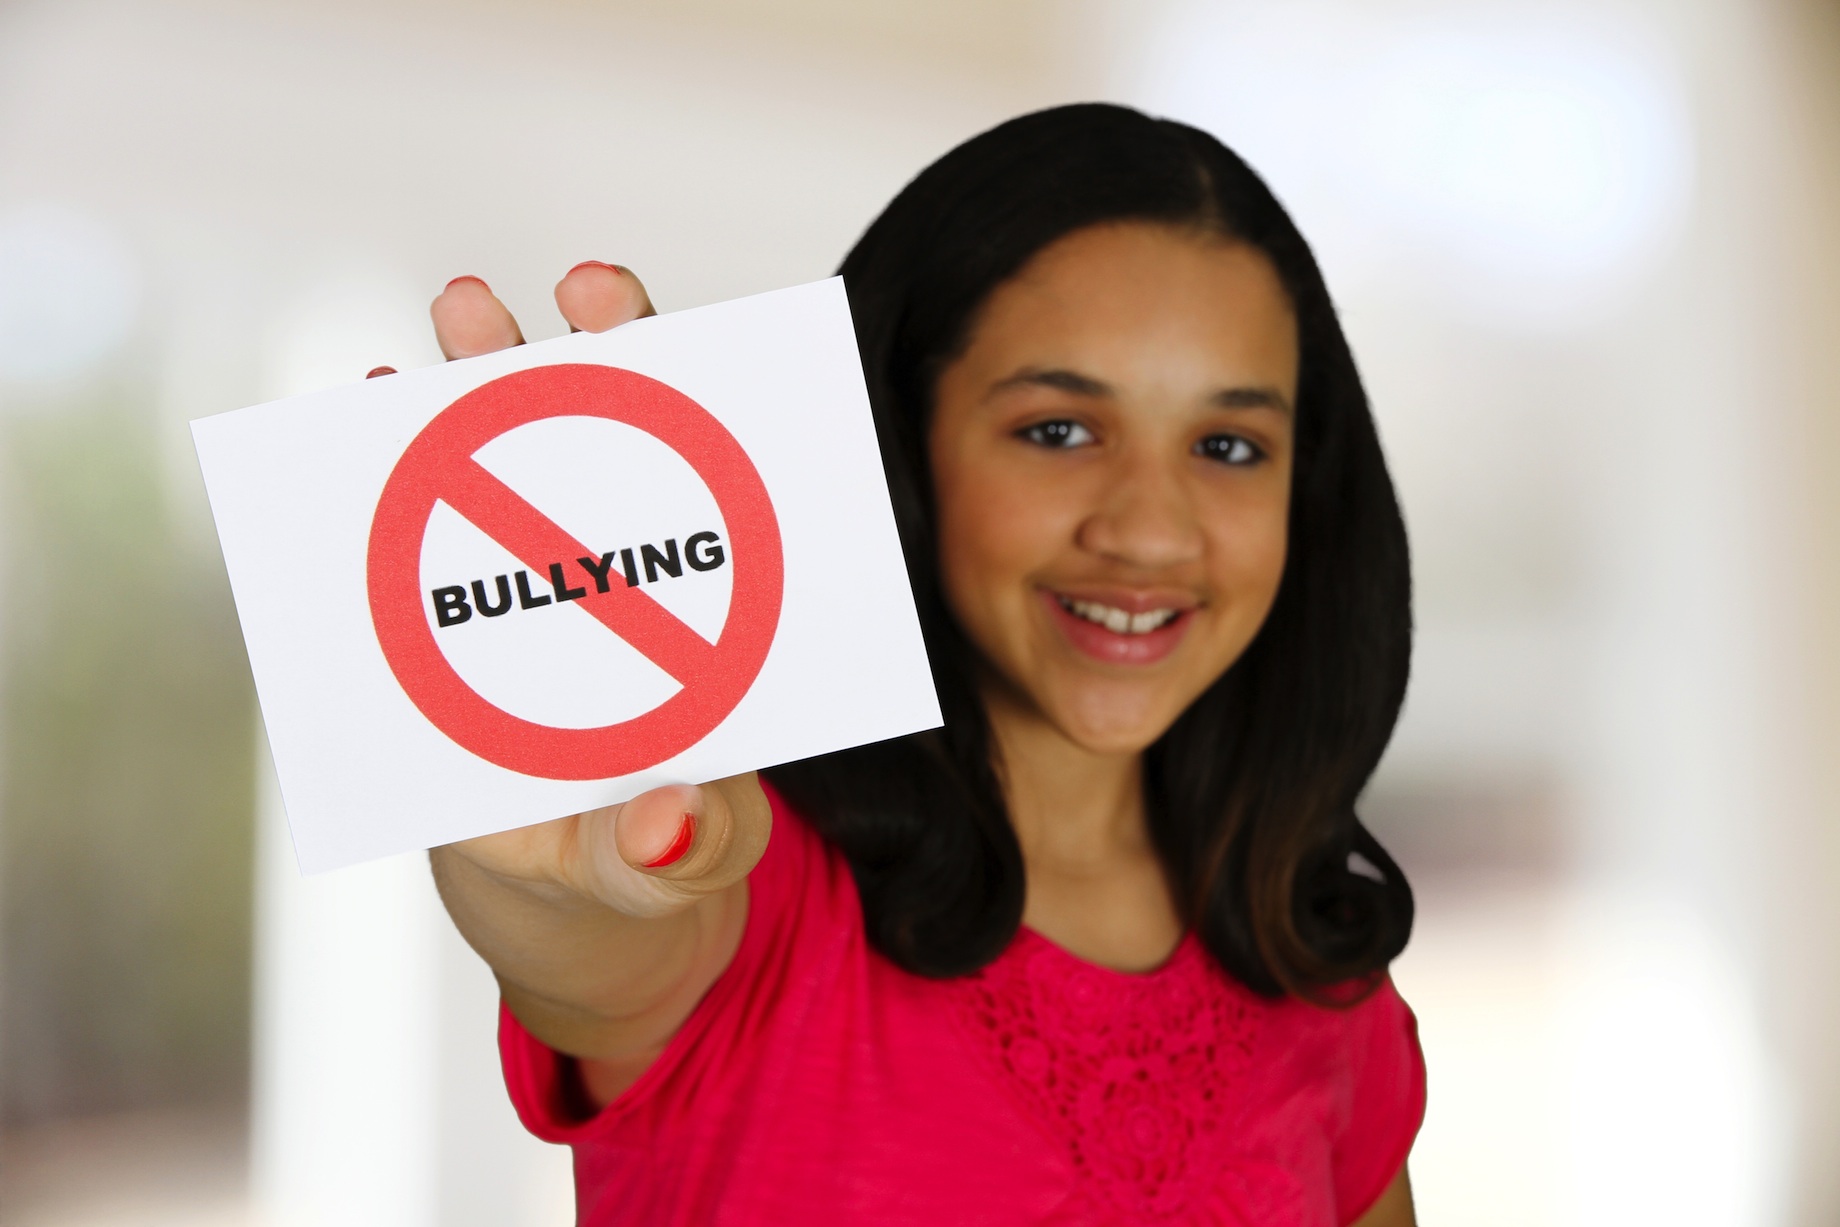 Let’s stop bullying. To This Day Project